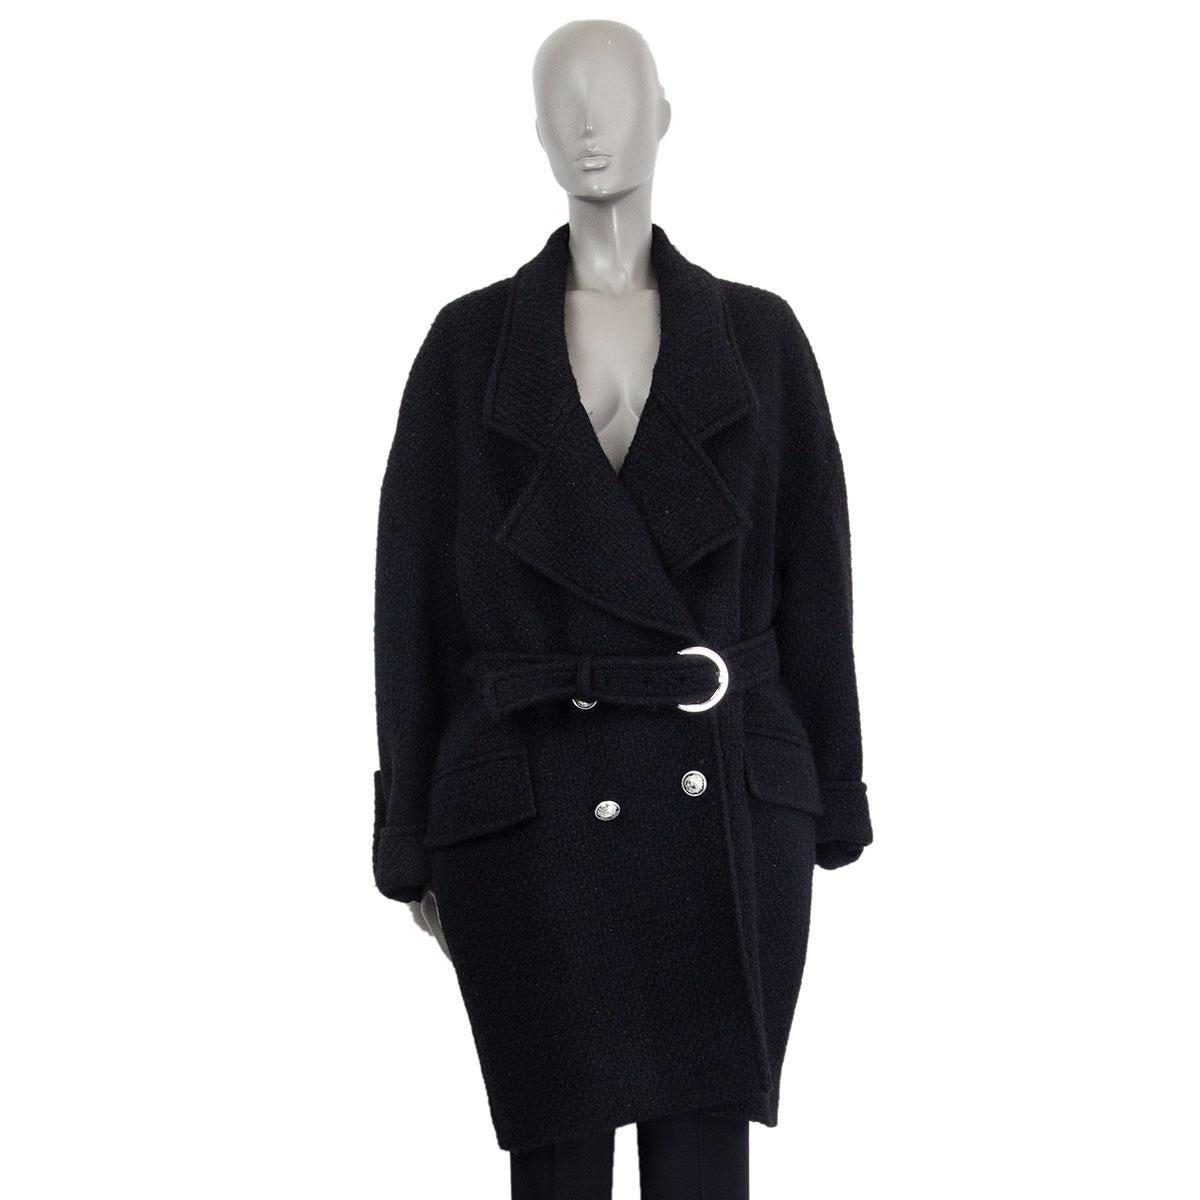 Balmain oversized belted double-breasted coat in black wool (96%) and polyamide (4%) with two flat pockets and folded buttoned cuffs. Lined in black cupro (100%). Closes with silver tone metal logo embossed buttons. Has been worn and is in excellent